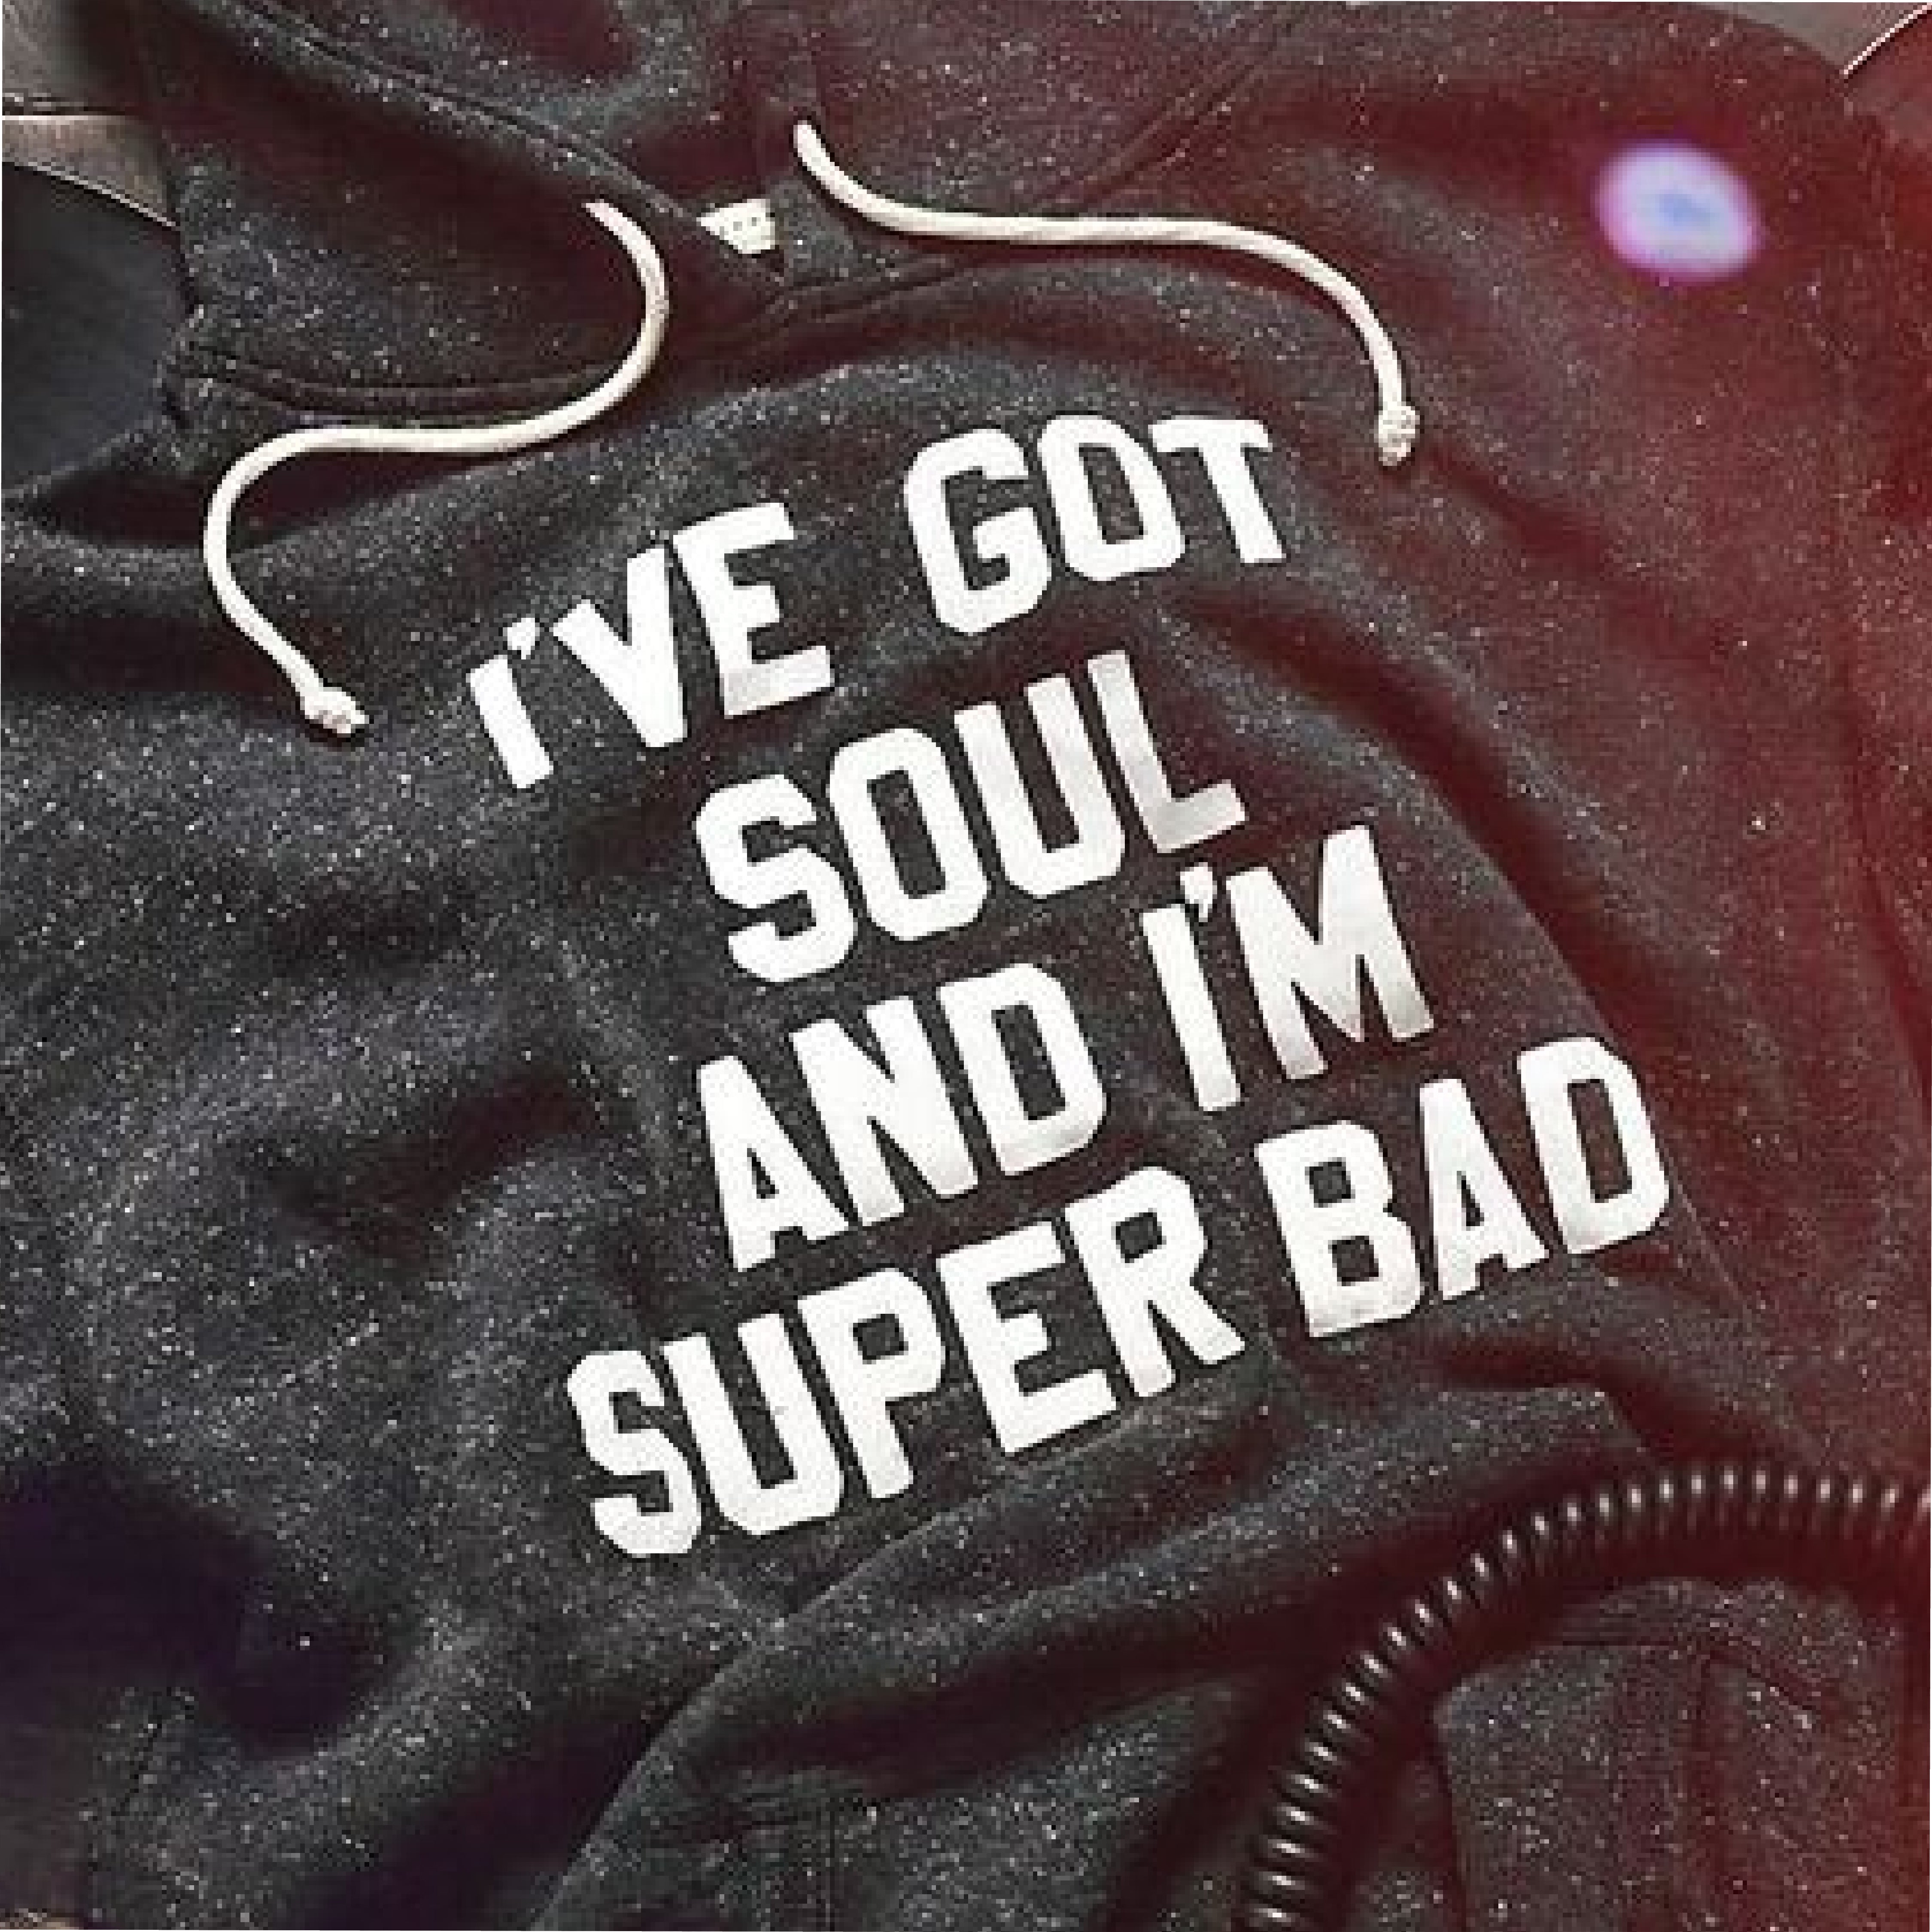 A close-up of a dark sweatshirt with the text 'I've got soul and I'm super bad.'